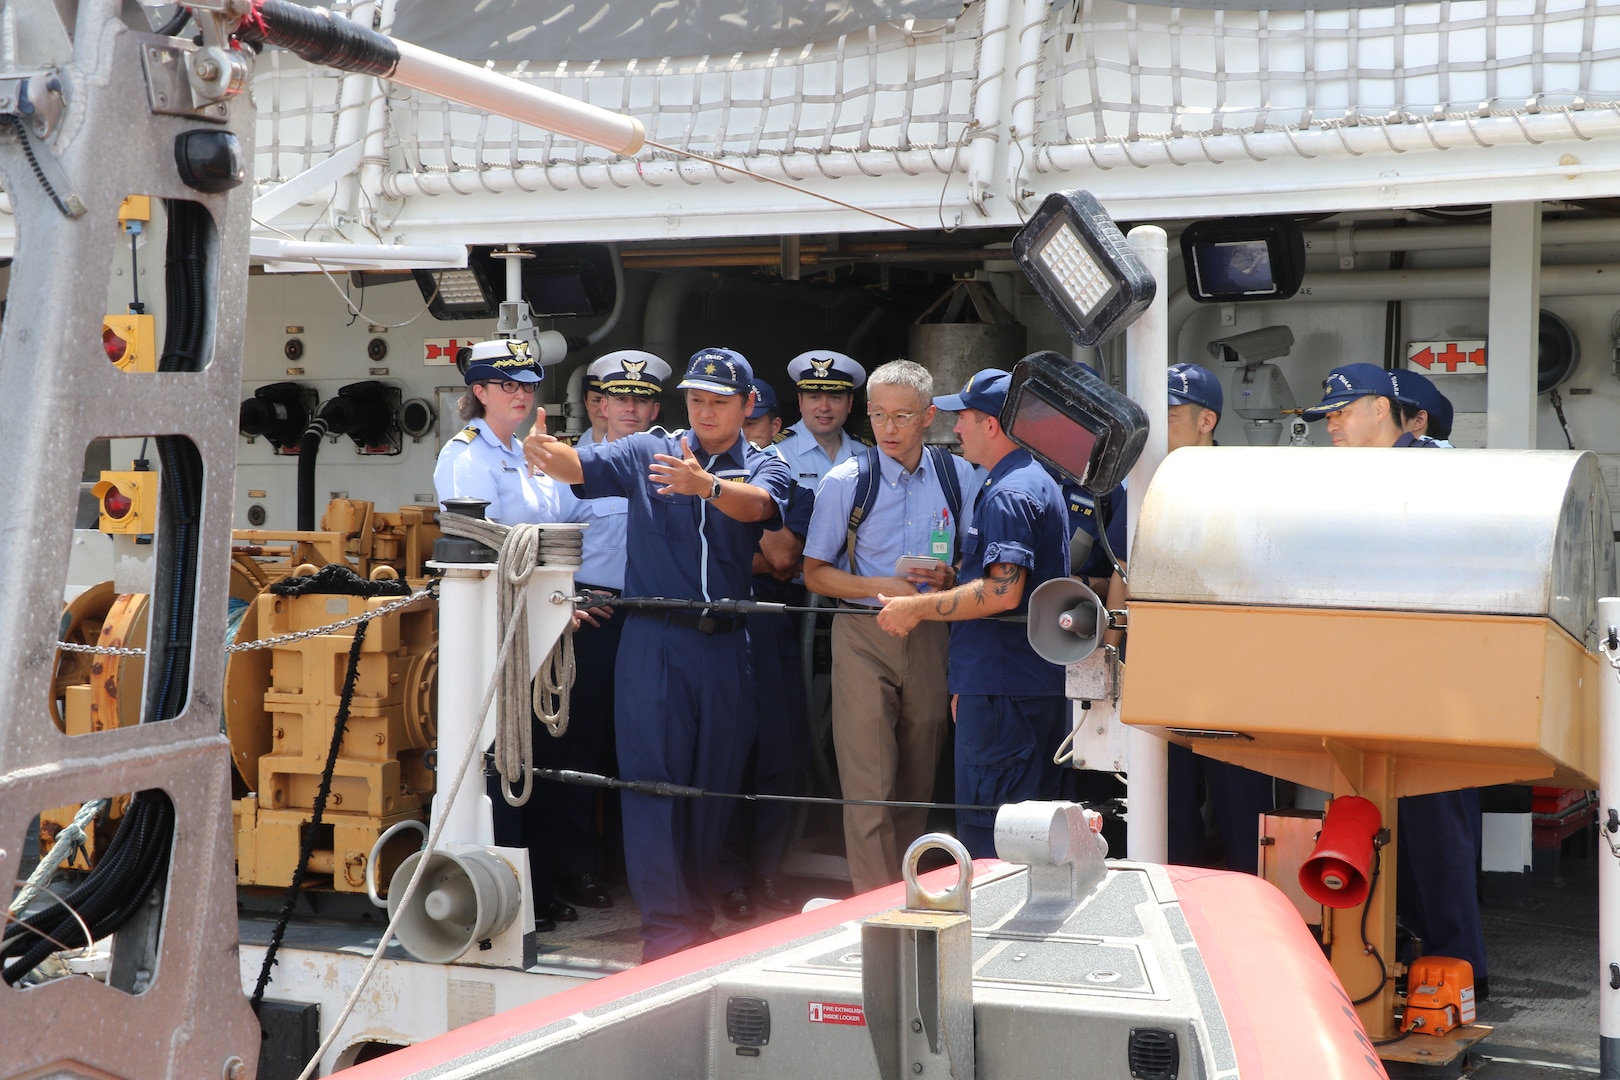 Petty Officer 2nd Class Noah Farris, a U.S. Coast Guard Cutter Munro (WMSL 755) crew member, discusses the cutter’s small boat stern launch capabilities with members from the Japan Coast Guard aboard the Munro during the cutter’s port call to Yokosuka, Japan, Aug. 8, 2023. Yokosuka was Munro’s first international port call during their months-long deployment to the Indo-Pacific region. (U.S. Coast Guard photo)